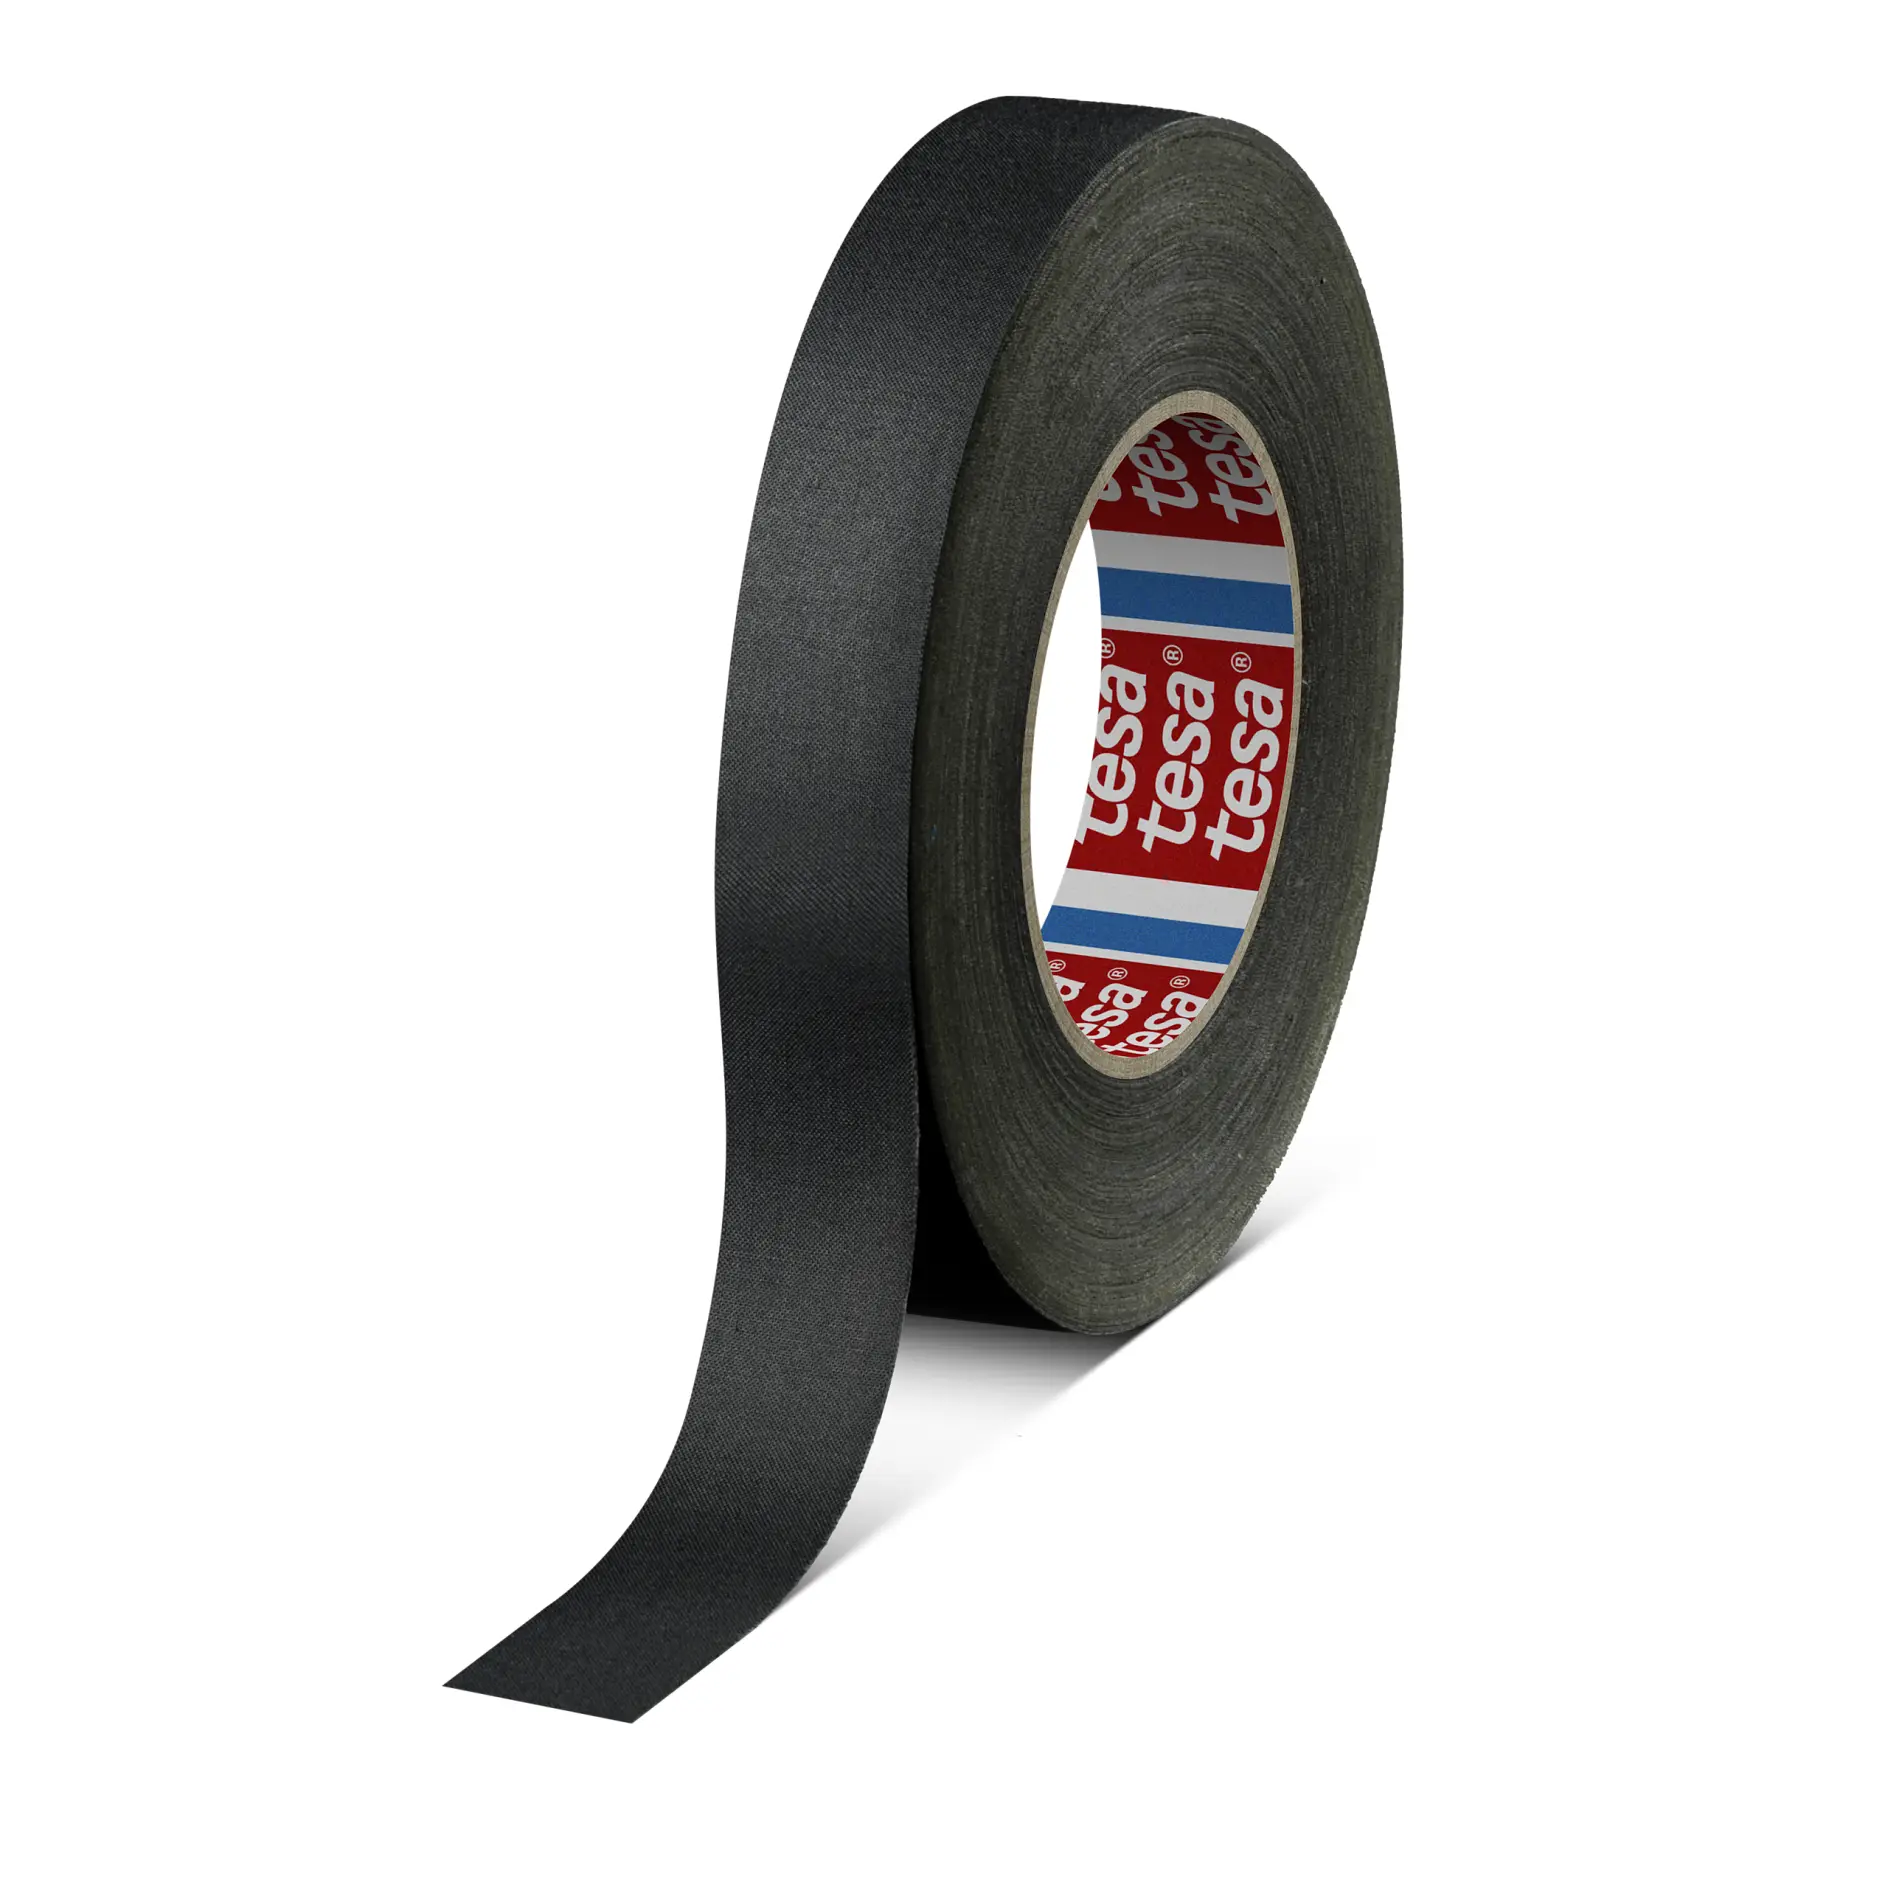 tesa-4541-conformable-uncoated-cloth-tape-black-045410001500-pr